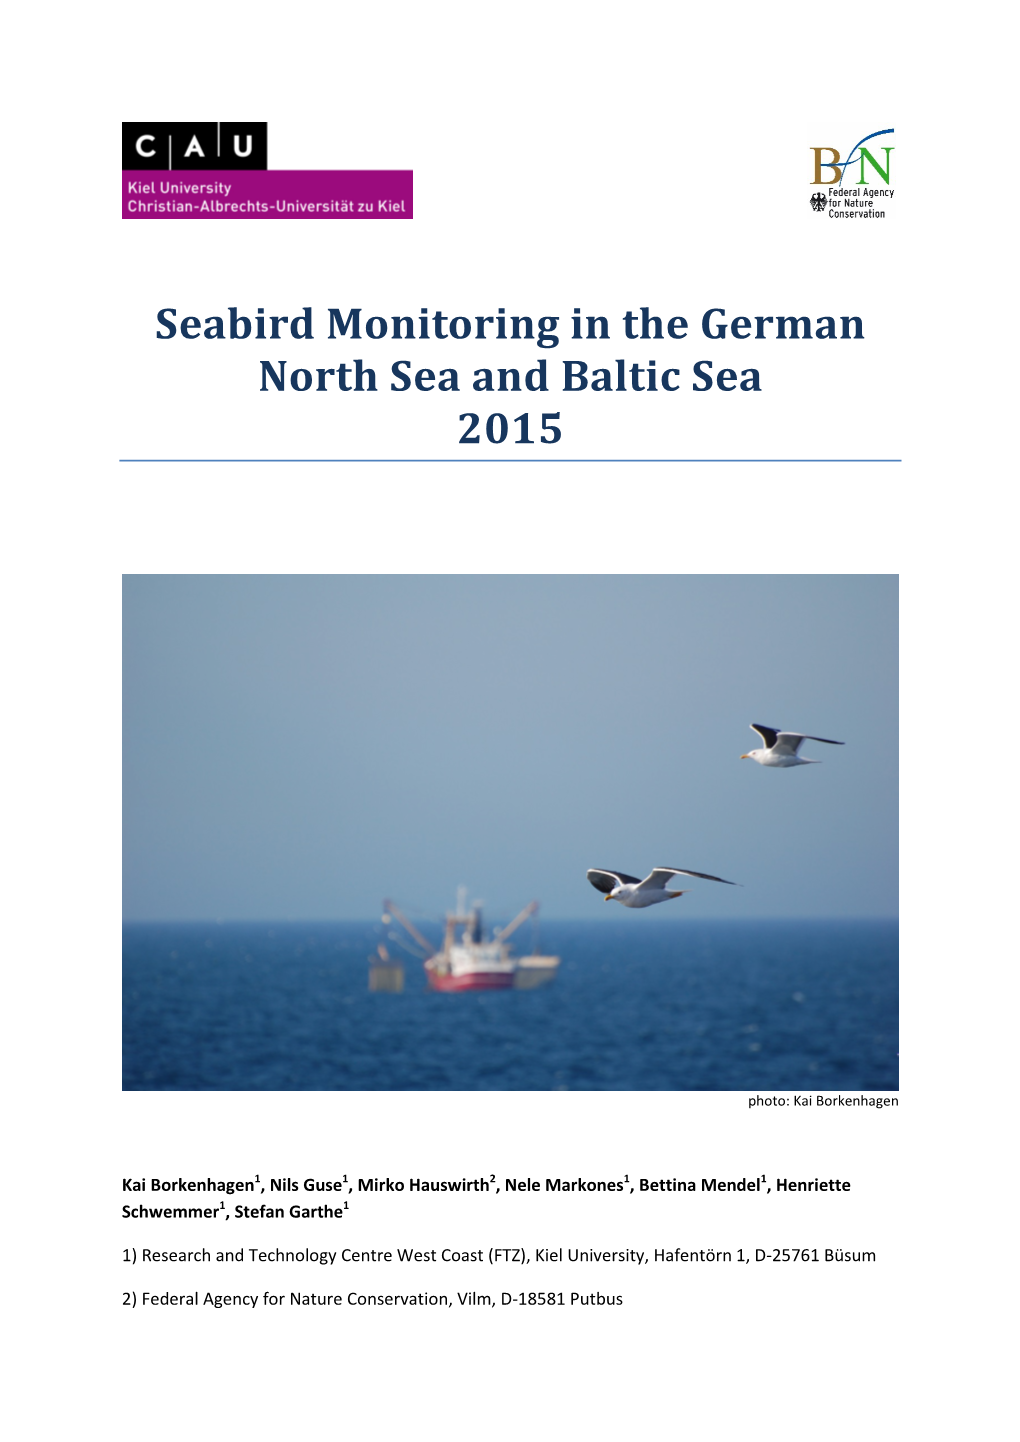 Seabird Monitoring in the German North Sea and Baltic Sea 2015